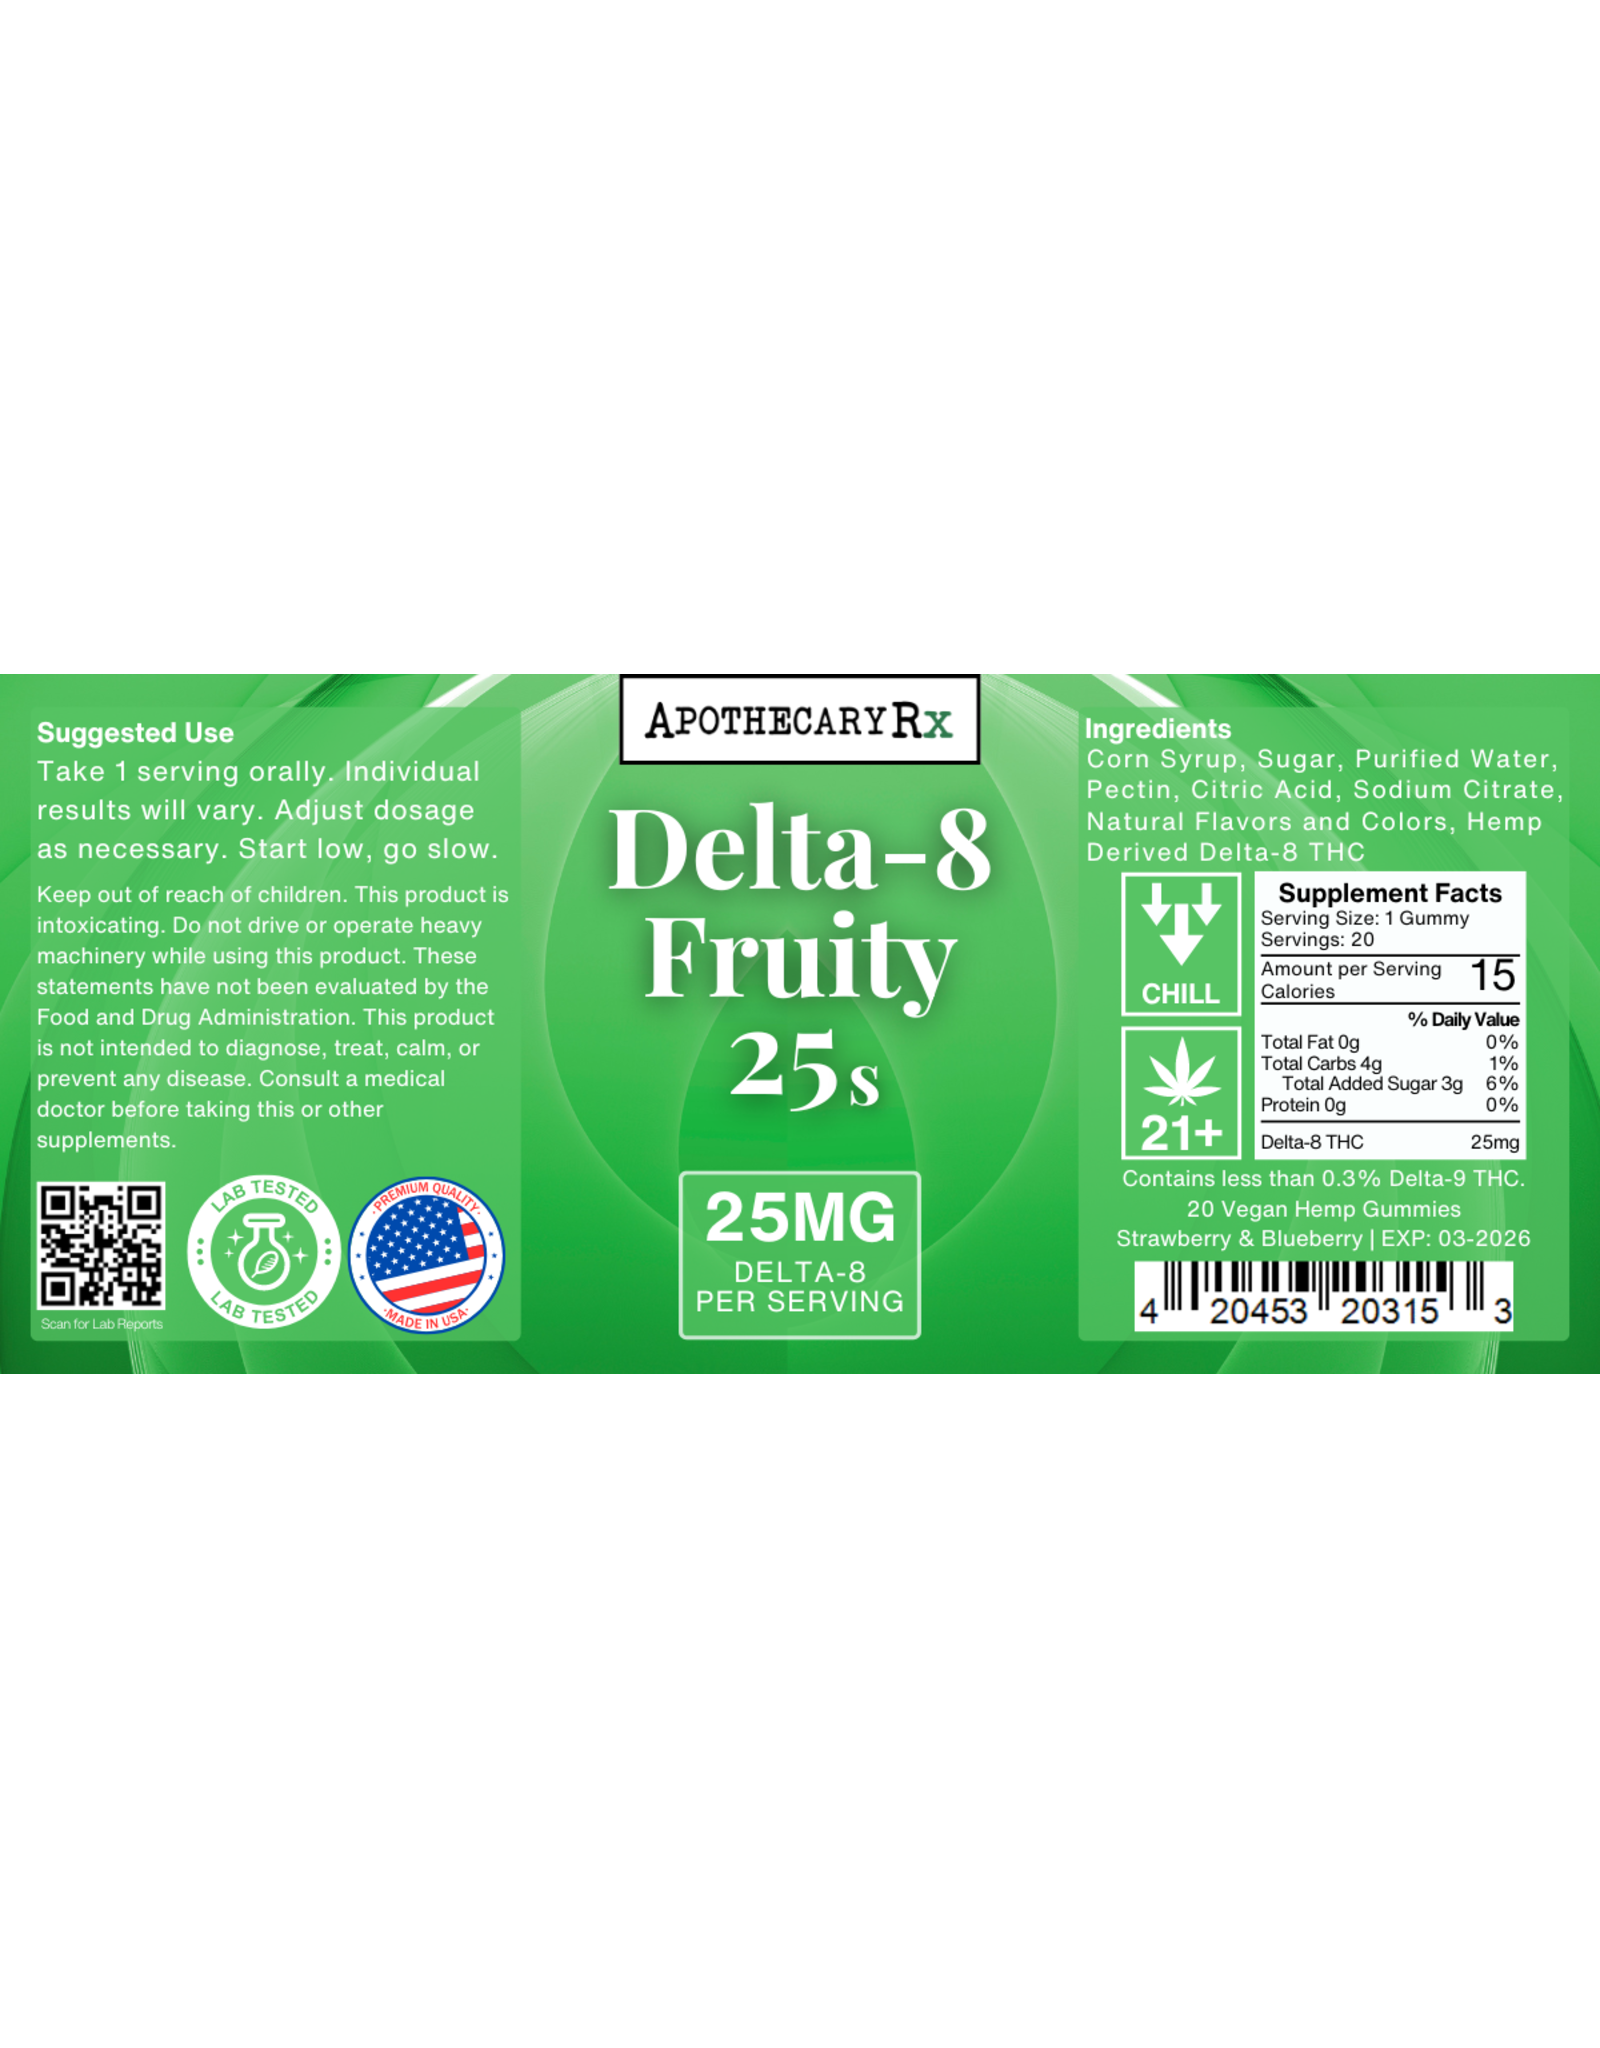 Apothecary Rx Apothecary Rx Delta 8 Fruity 25s Vegan Gummies 25mg 20ct